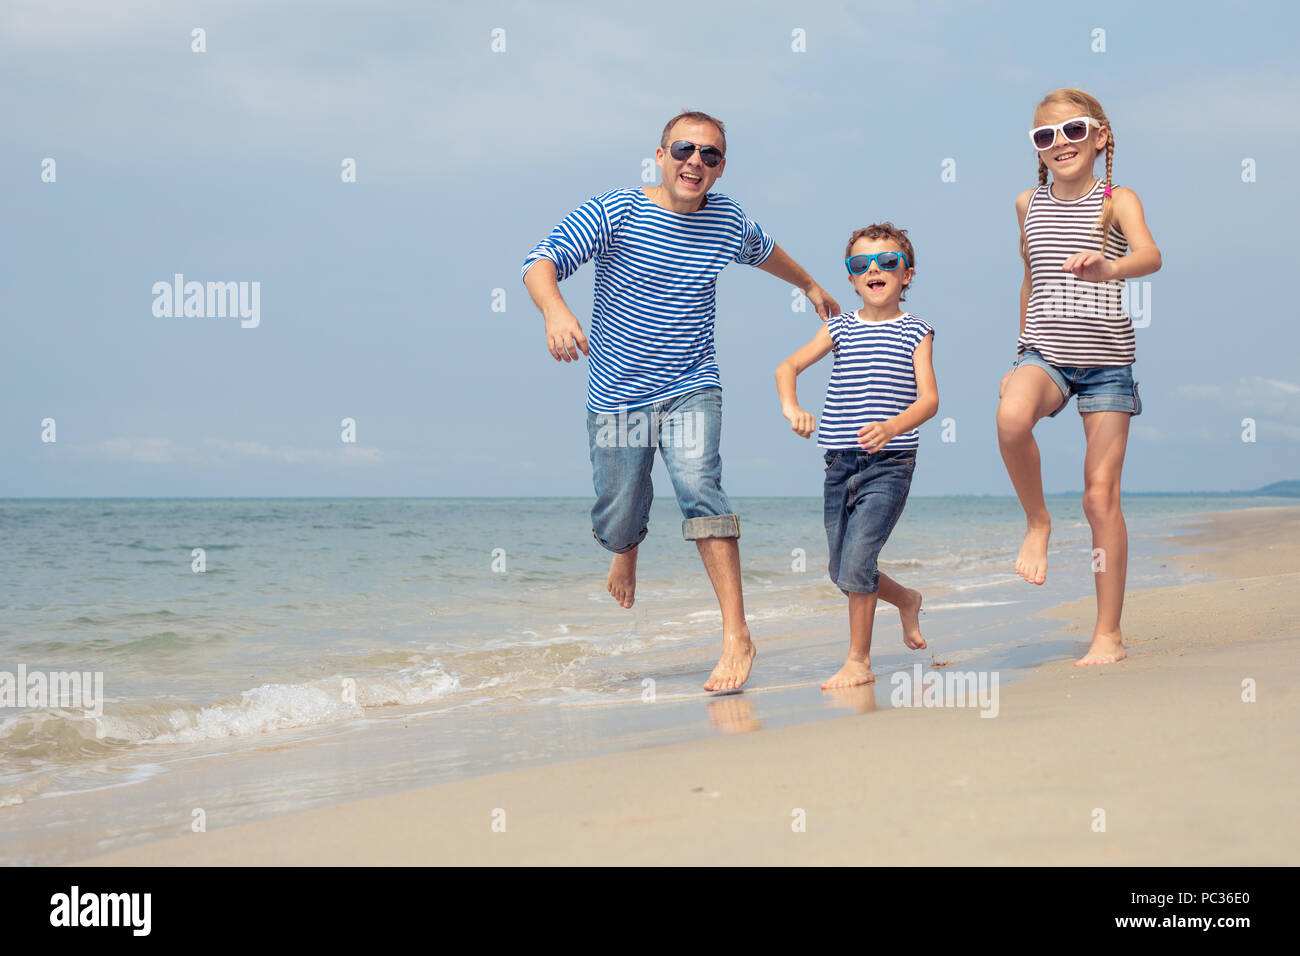 Father and kids playing on the beach at the day time. They are dressed in sailor's vests. Concept of sailors on vacation and friendly family. Stock Photo